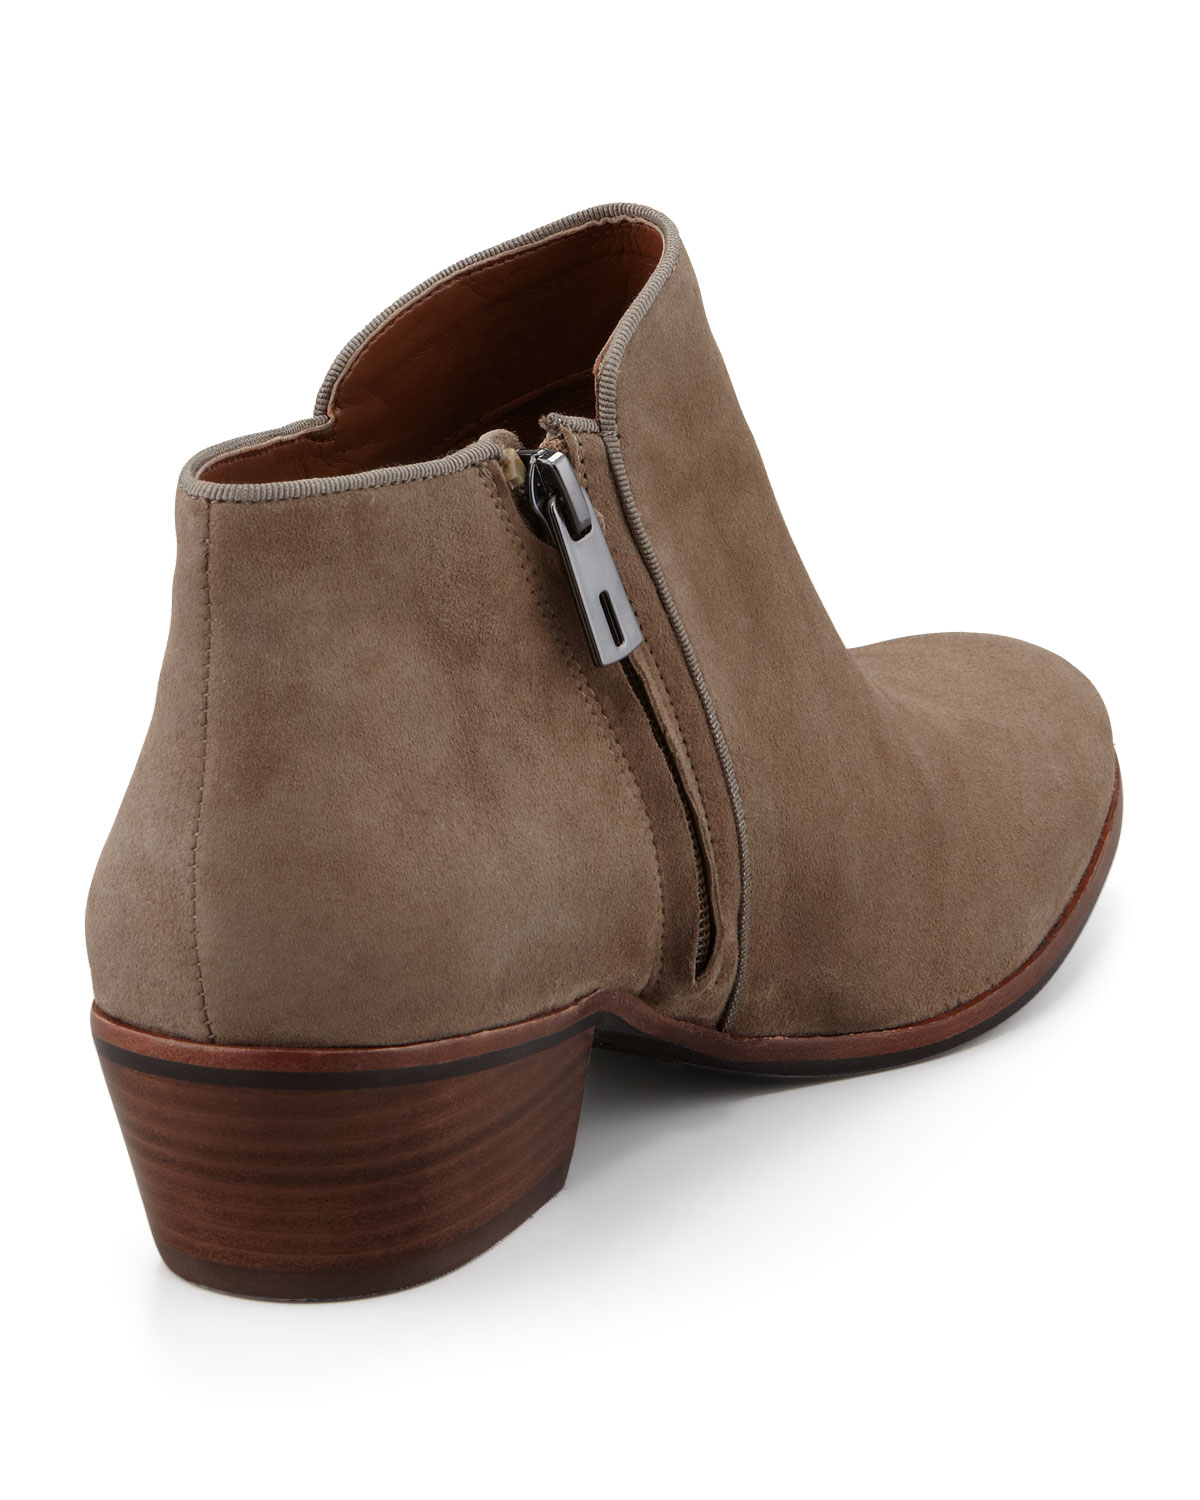 Lyst - Sam Edelman Petty Suede Ankle Boot Tan in Brown